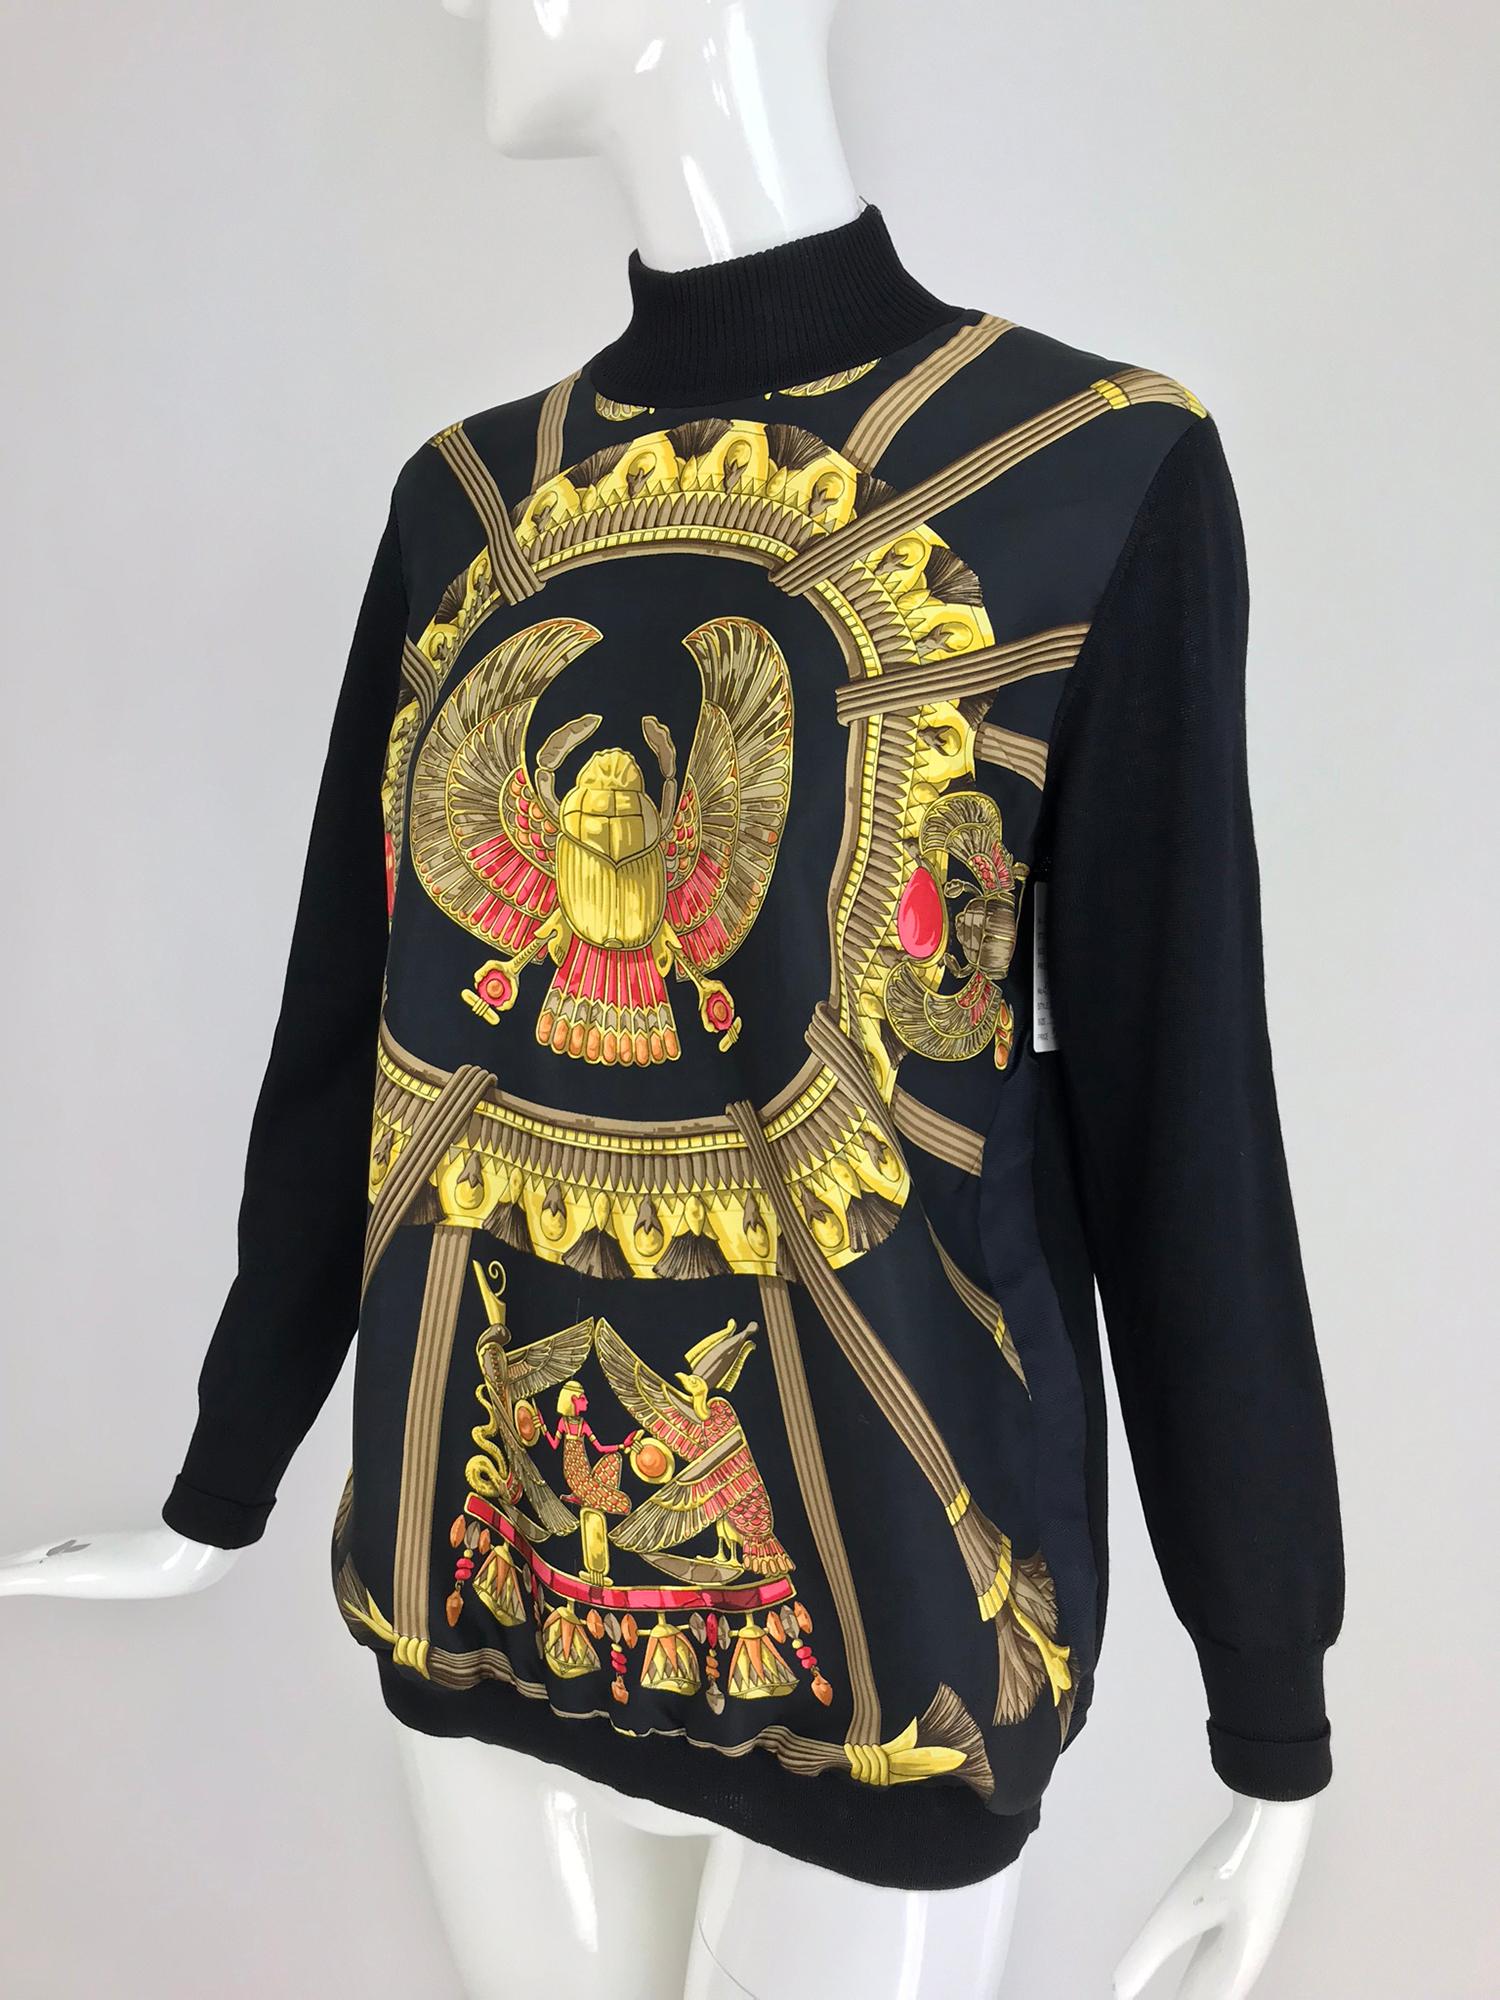 Hermes Scarab Scarabees et Pectoraux silk twill scarf sweater from the 1970s designed by Caty Latham. Fine black wool knit sweater, pull on style with a mock turtleneck that has a side zipper opening. The front of the sweater is made from Hermes